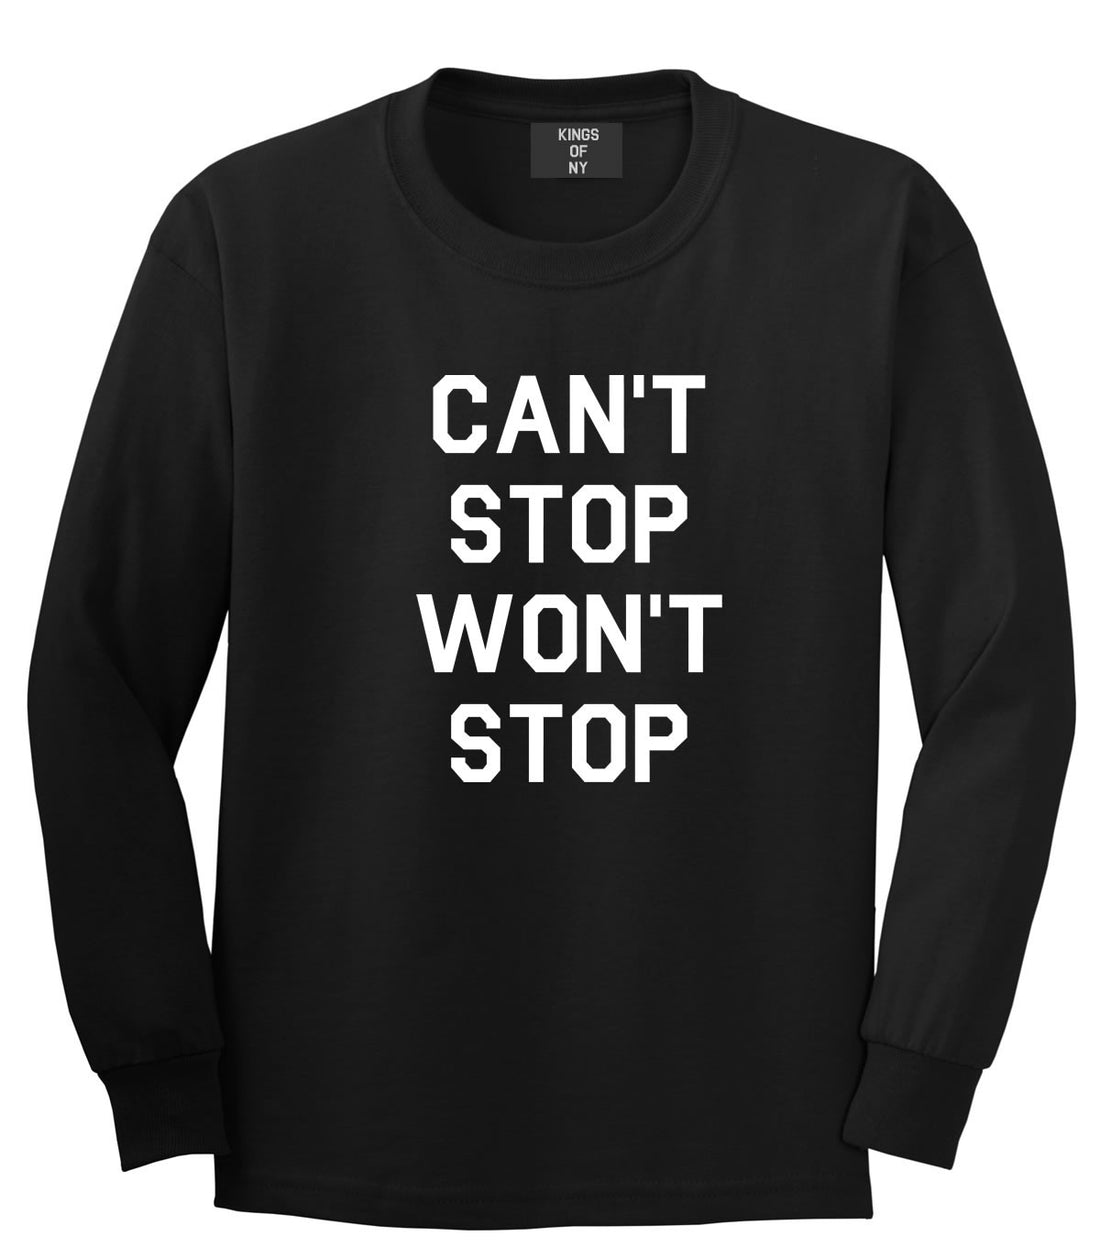  Kings Of NY Cant Stop Wont Stop Long Sleeve T-Shirt in Black